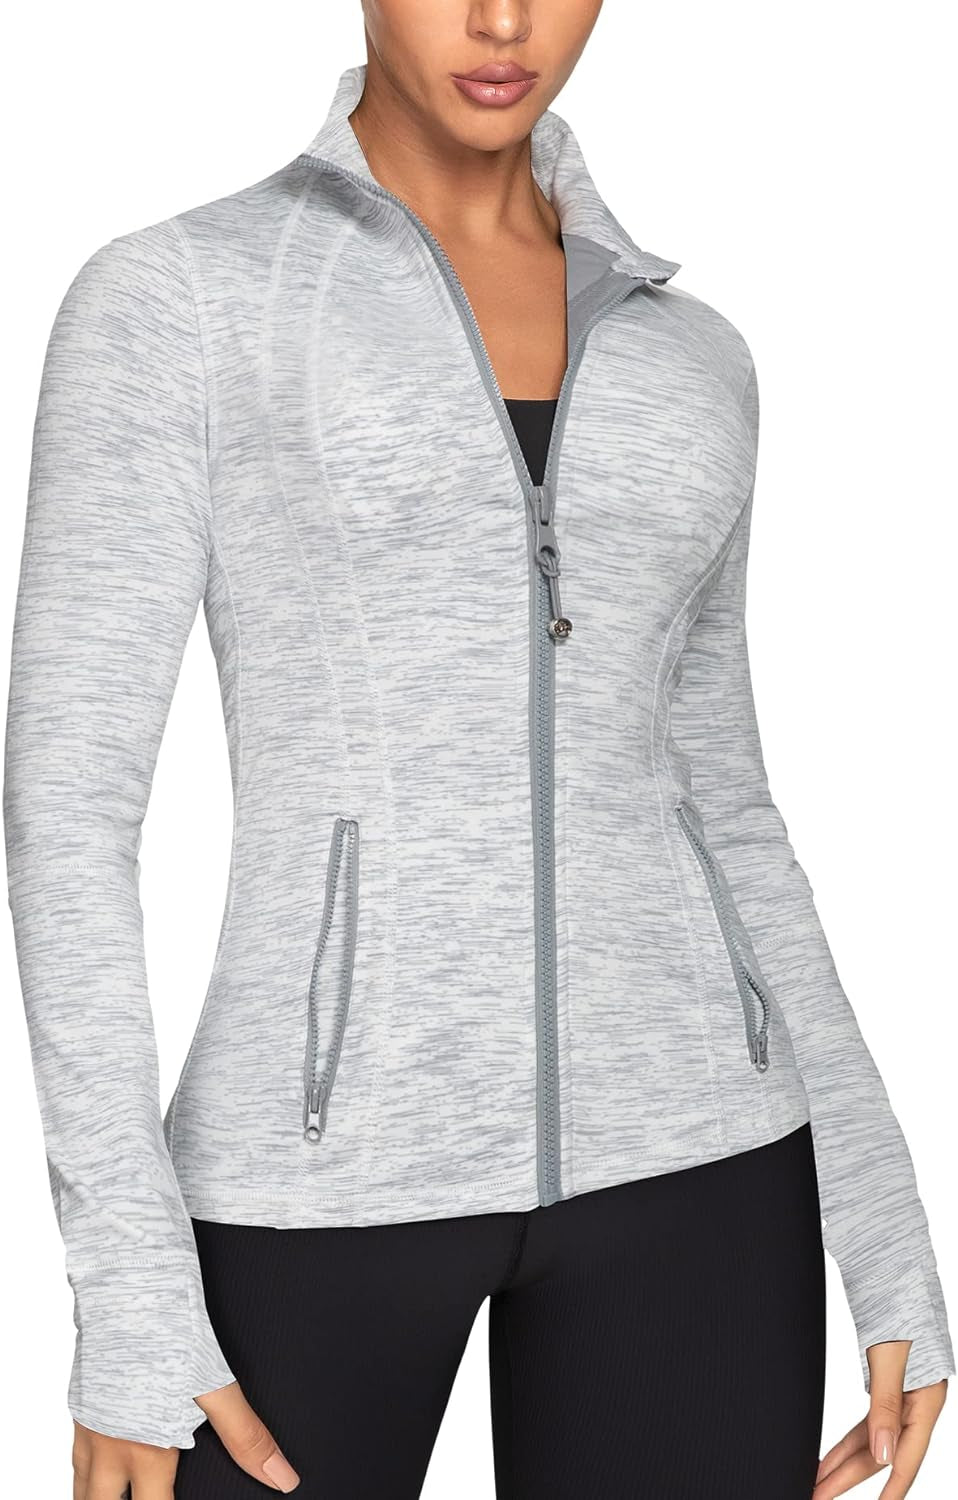 "Enhance Your Comfort and Style with our Women's Lightweight Cotton Running Jacket - Ideal for Gym, Yoga, and Athleisure Wear!"